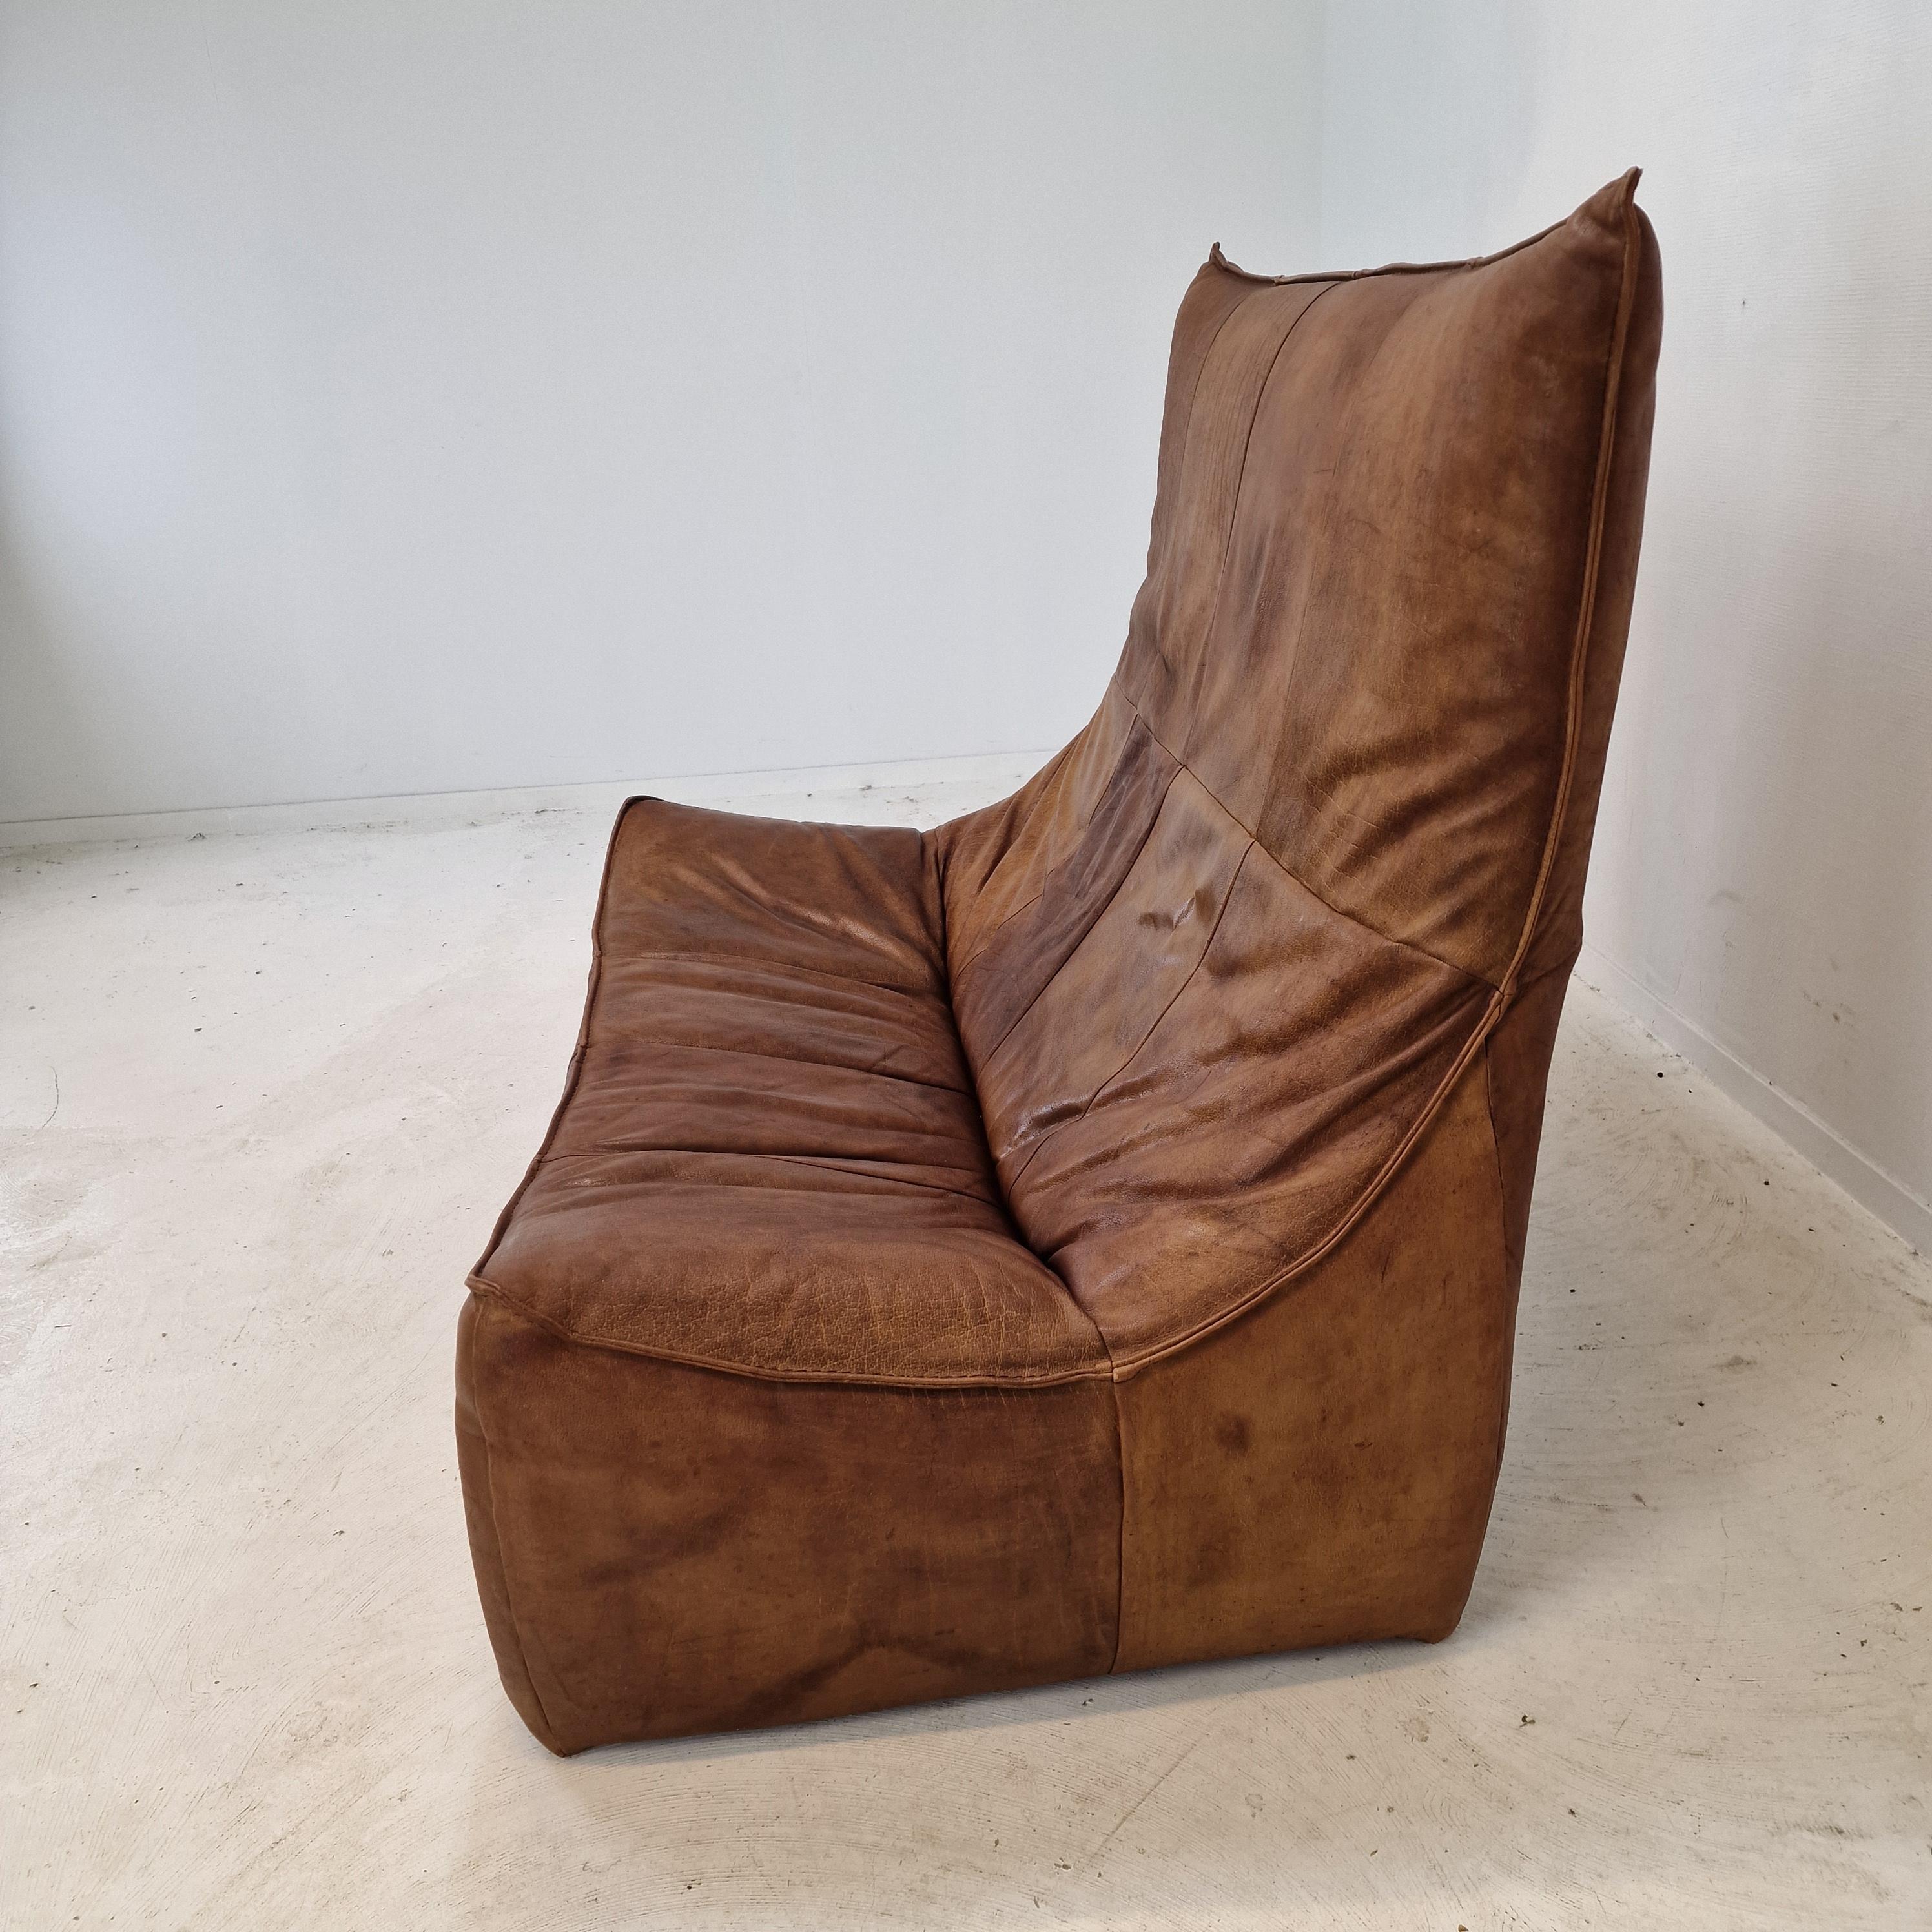 Montis “The Rock” Sofa In Brown Leather By Gerard Van Den Berg, 1970s For Sale 1